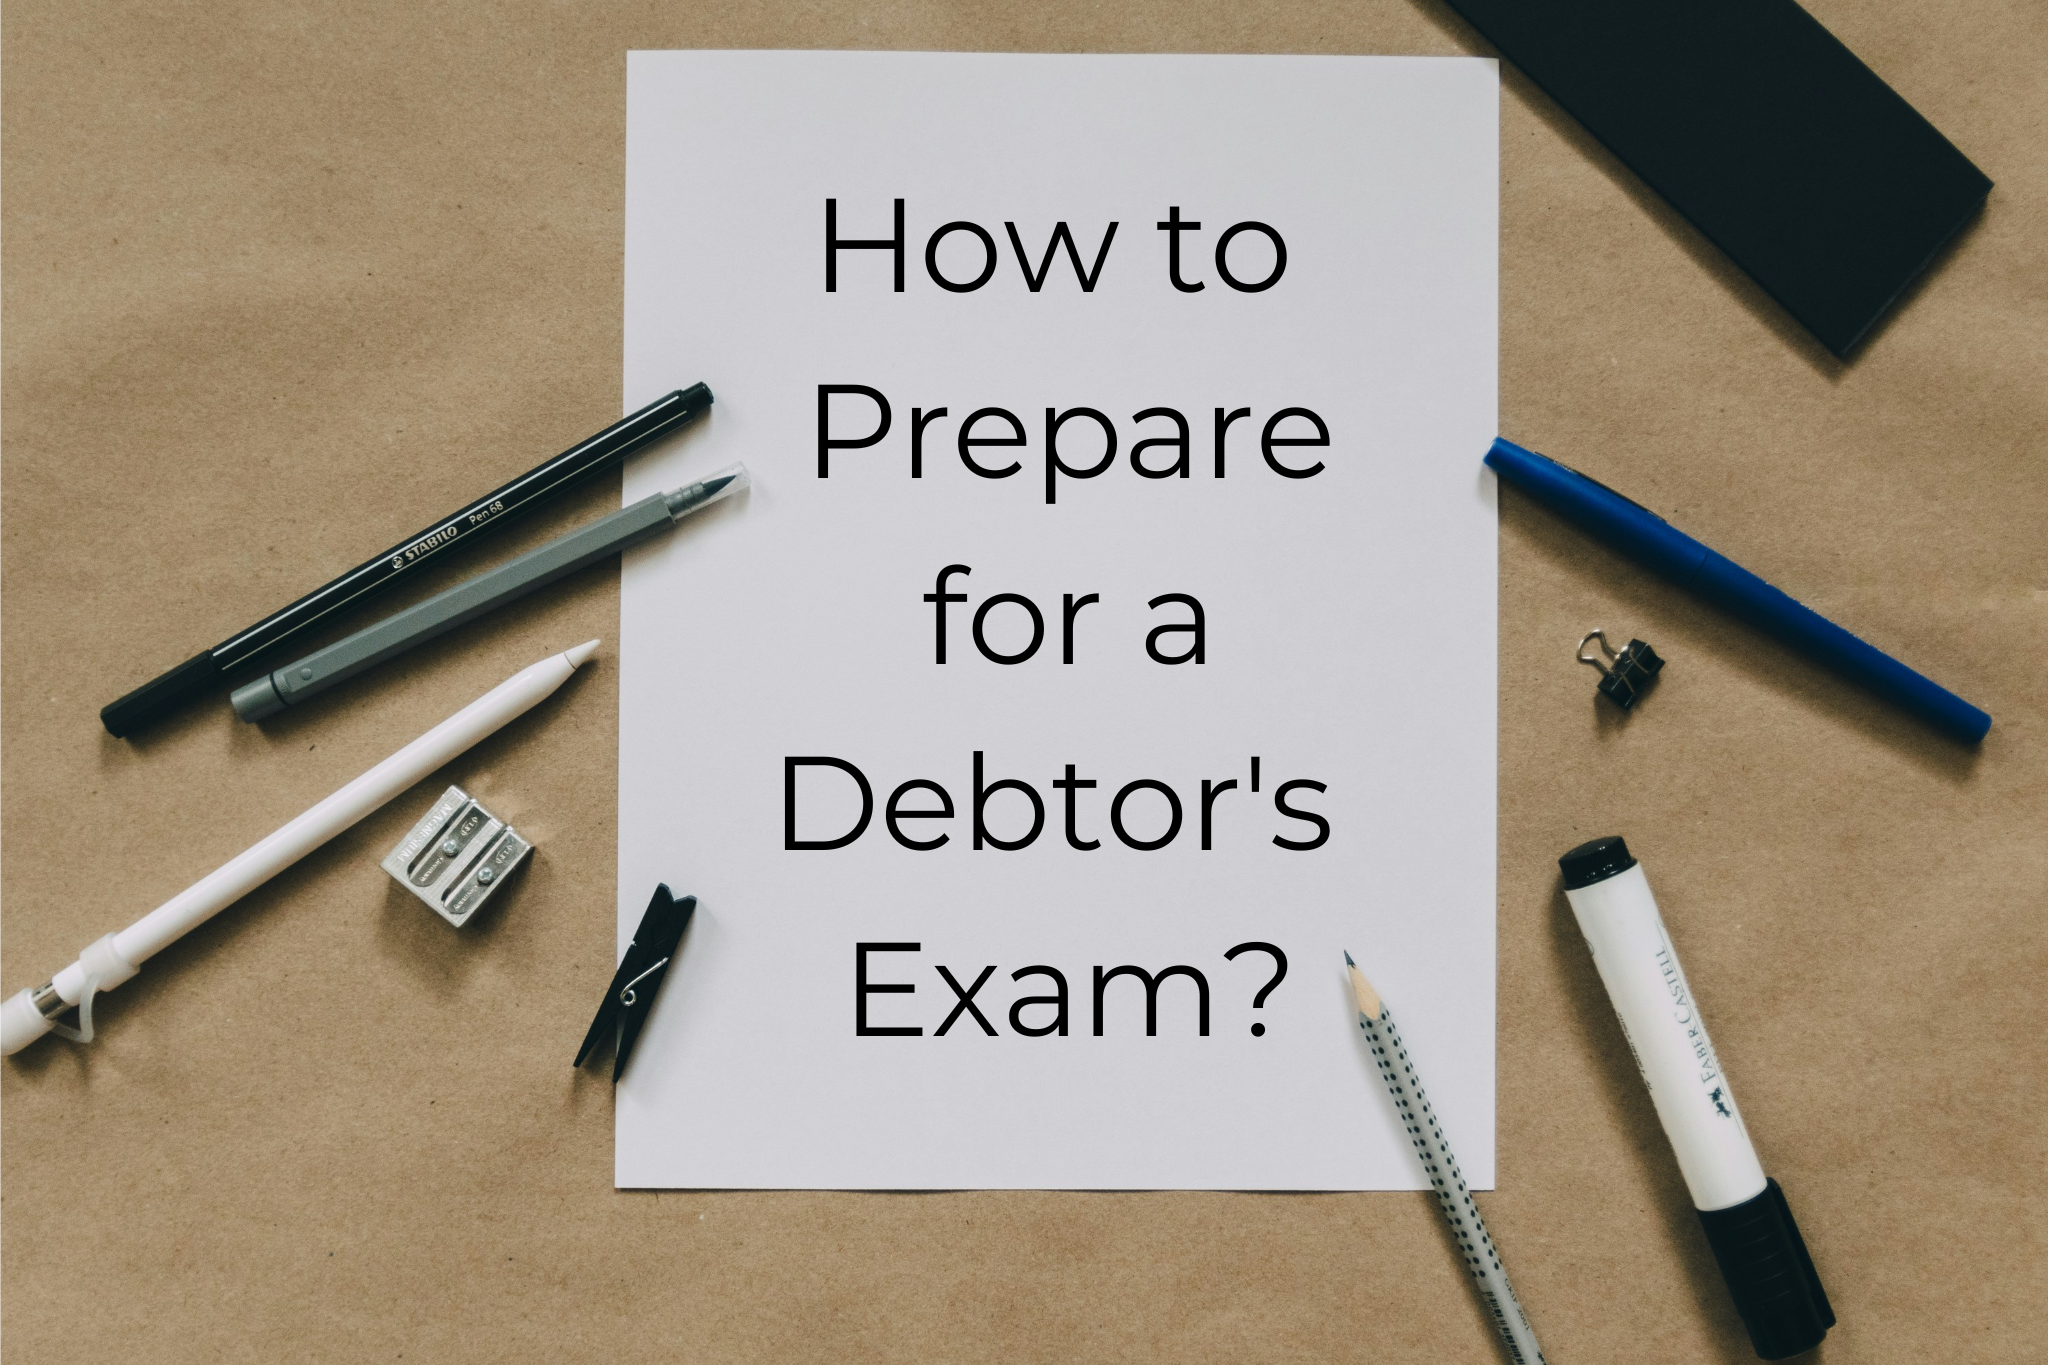 Debtor’s Exam: Meaning, Preparation and Process